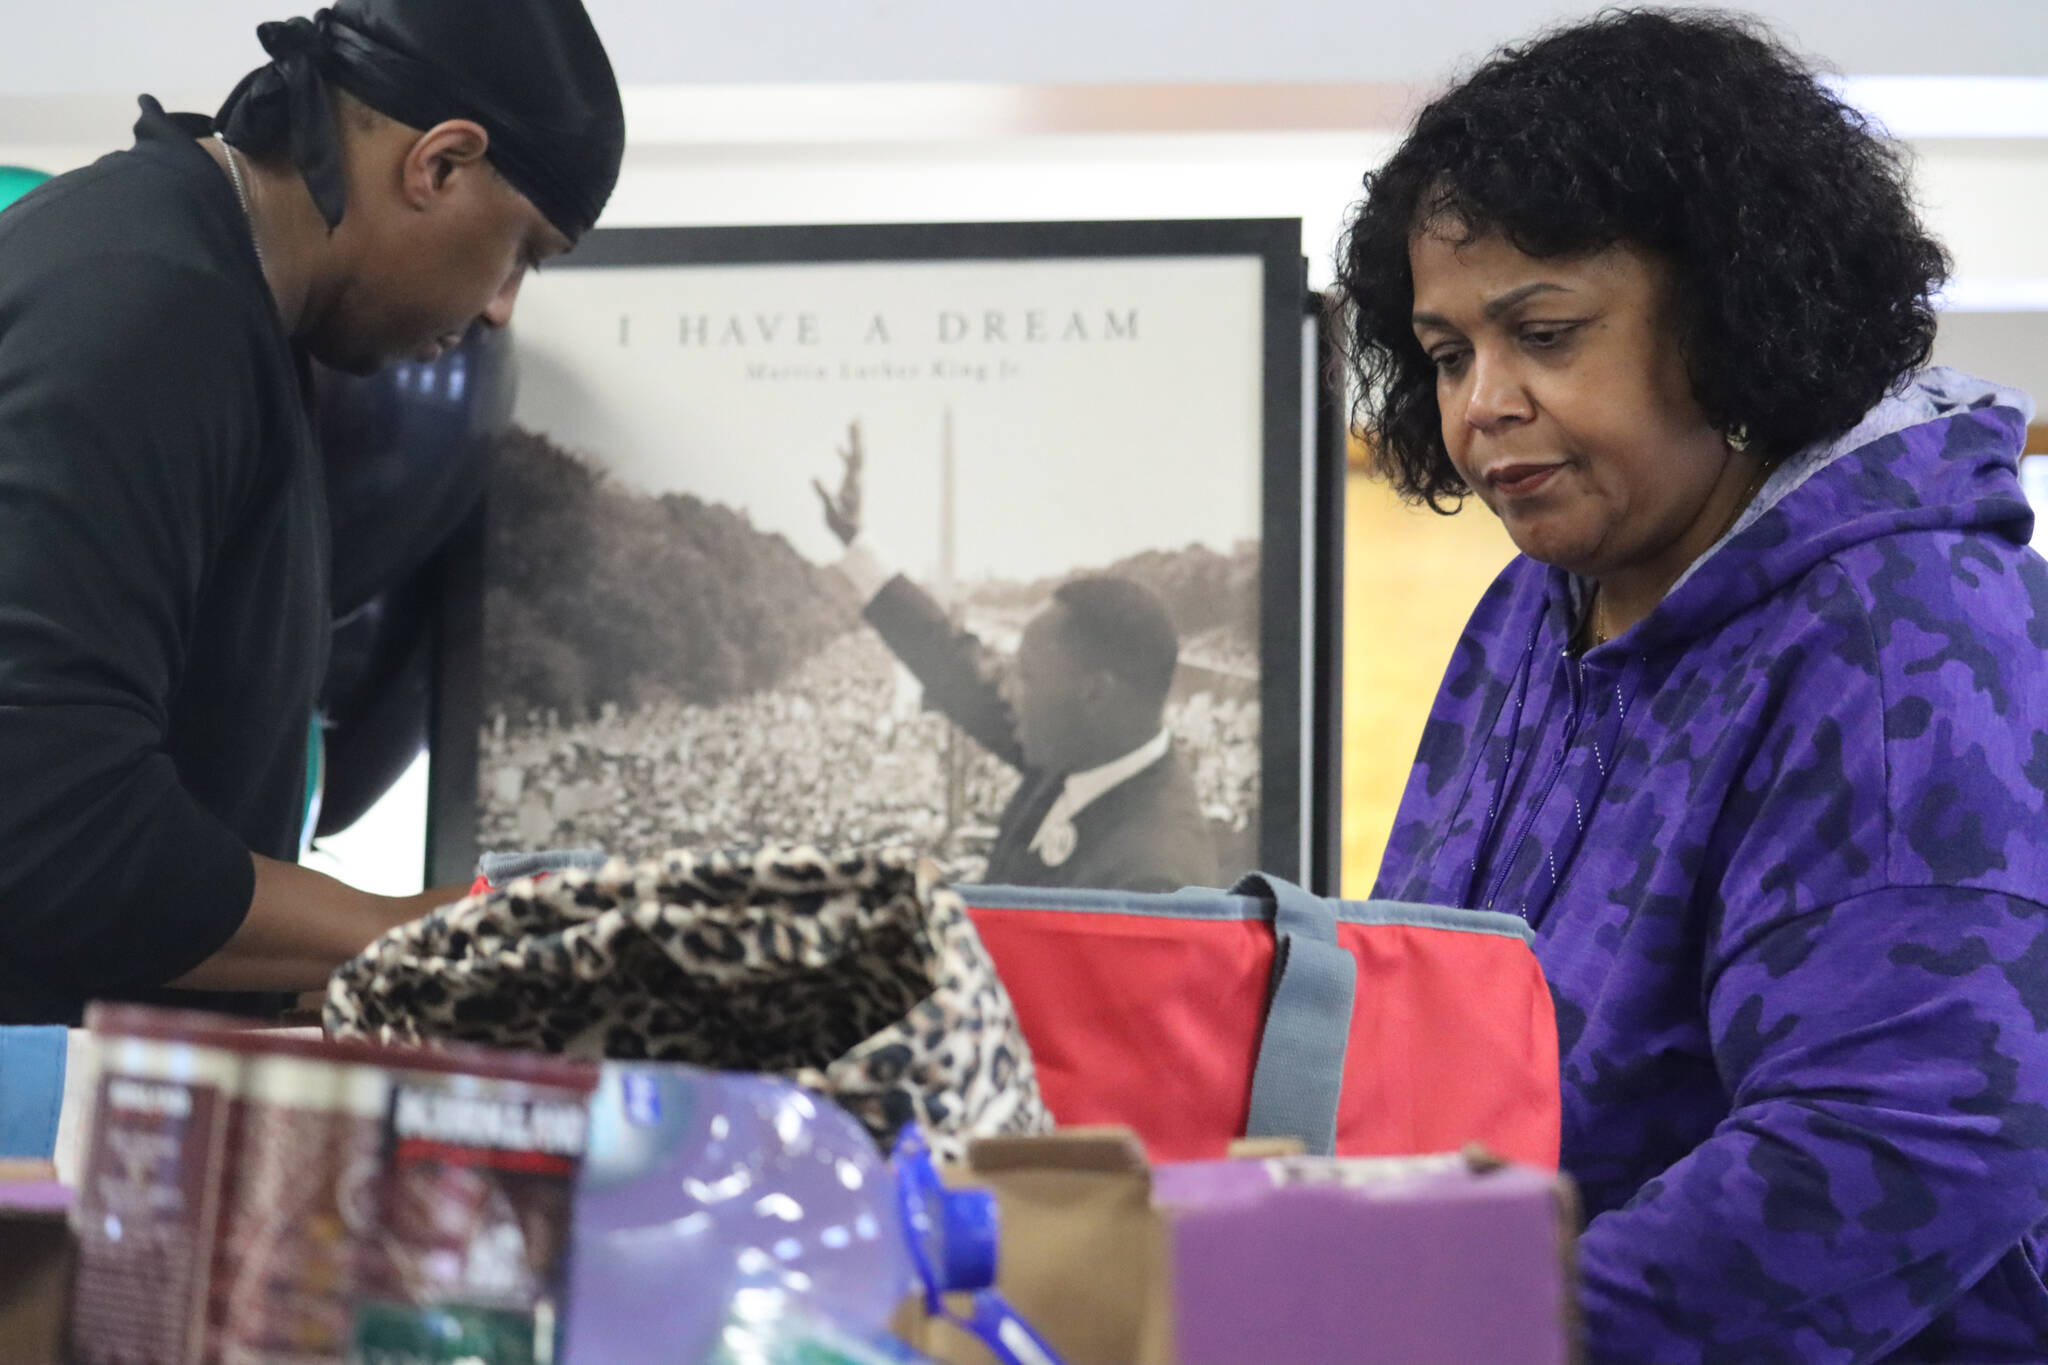 Sherry Patterson and her son Michael sort through the large pile of donations received on Monday as part of the Black Awareness Association of Juneau’s annual collection drive at St. Paul’s Catholic Church. (Jonson Kuhn / Juneau Empire)